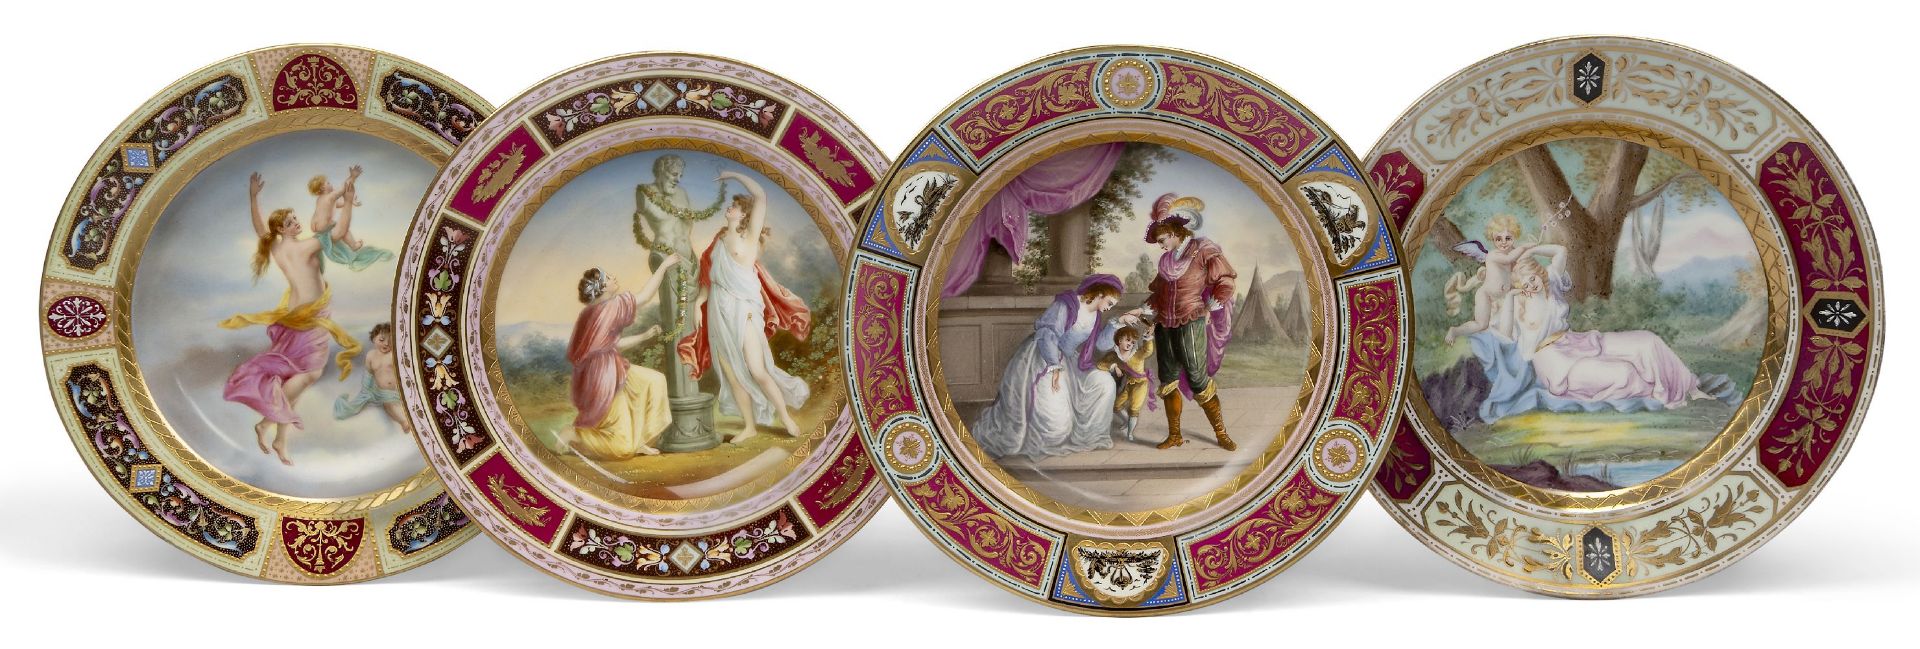 Four Vienna-style porcelain cabinet plates, late 19th/20th century, blue beehive marks and titles to